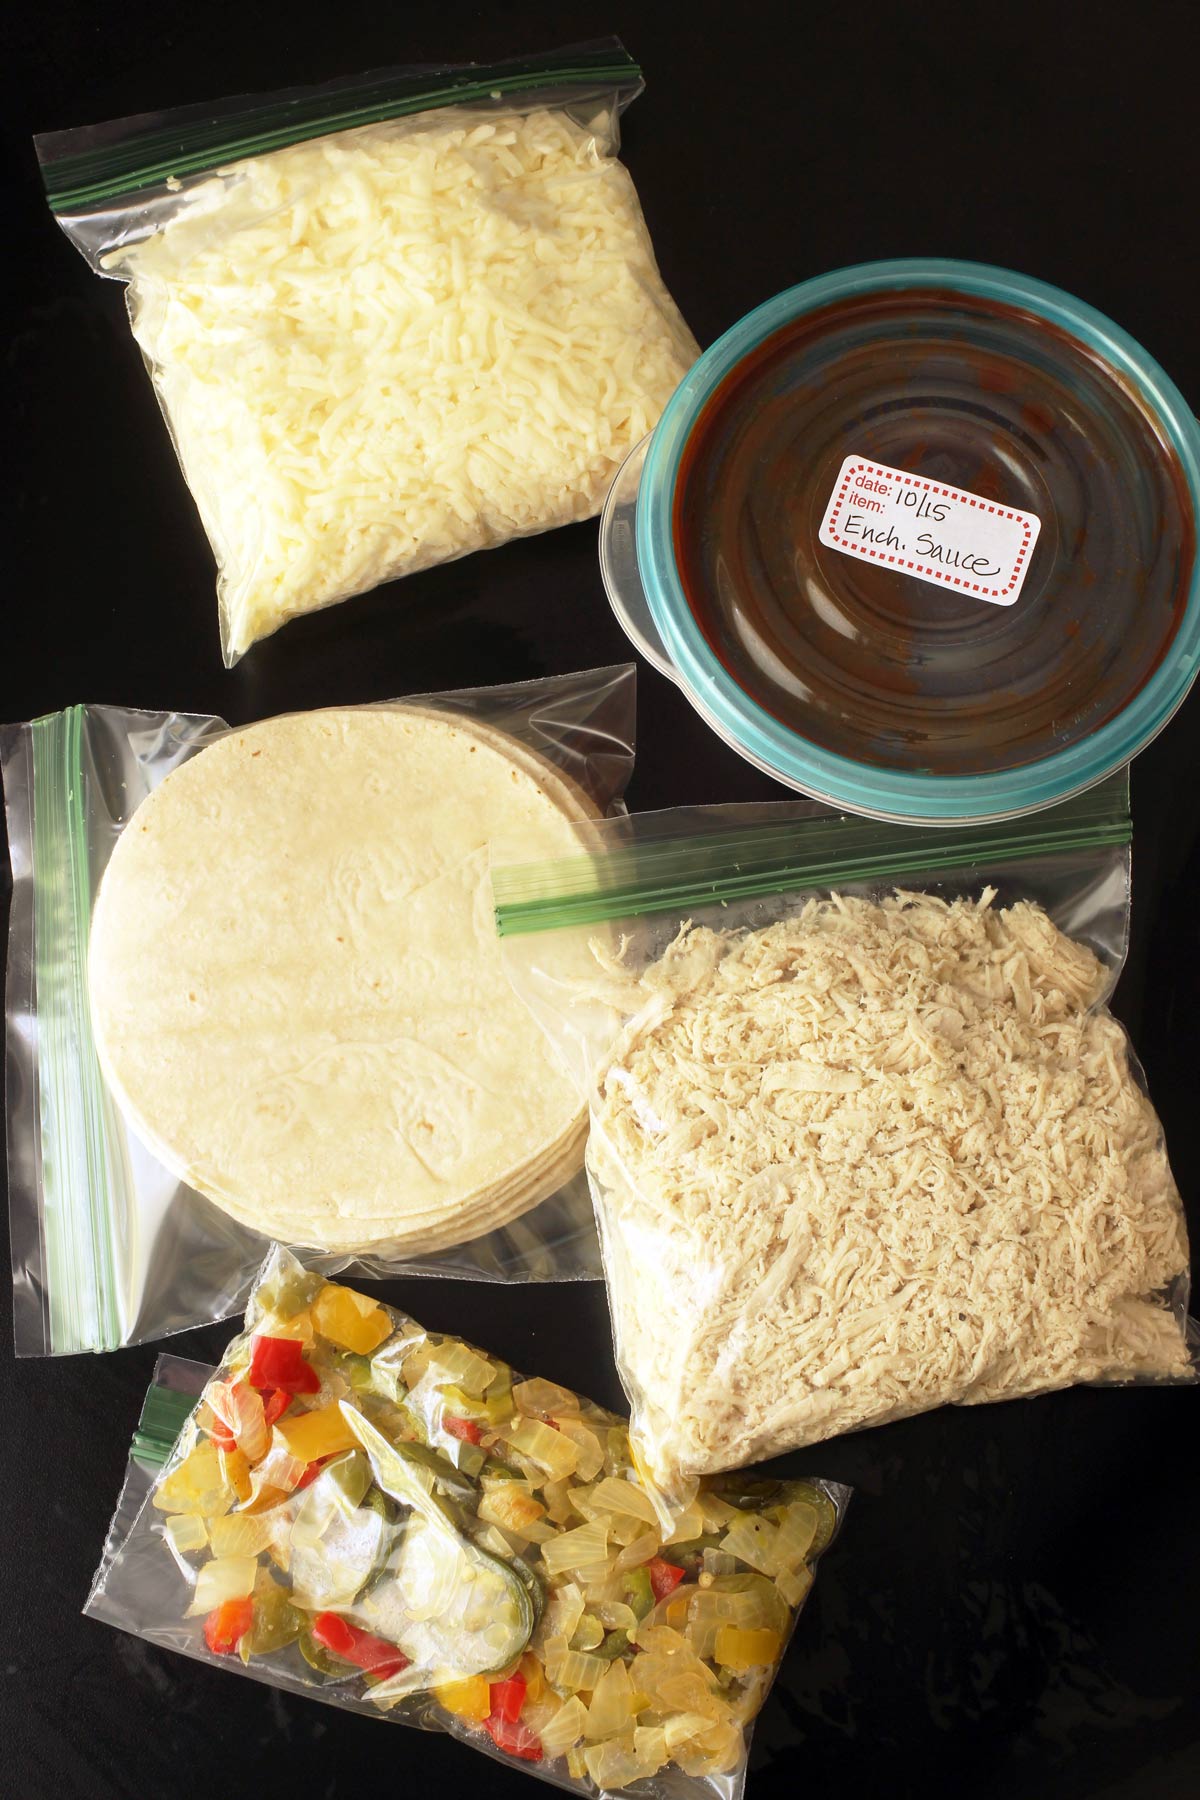 a freezer crockpot meal kit made from bags of cheese, tortillas, chicken, and sautéed veg as well as a container of sauce.